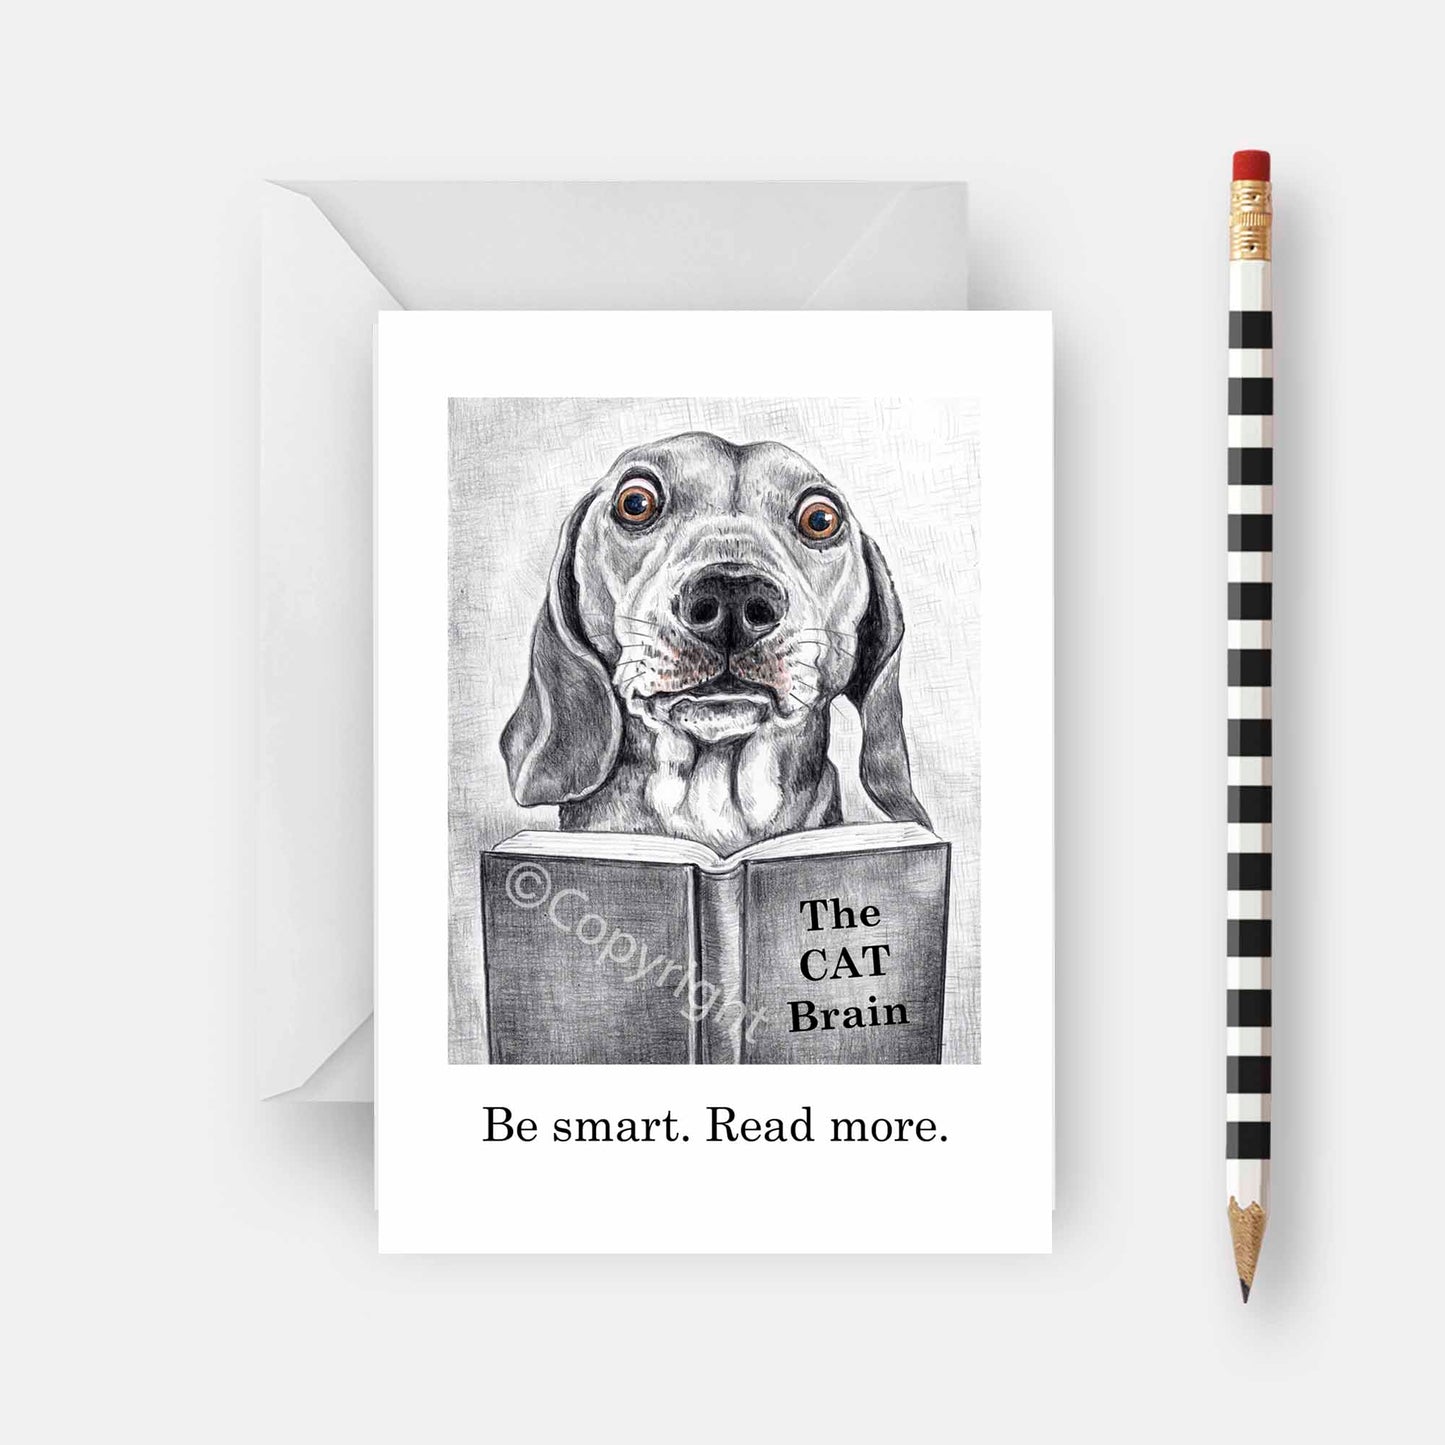 Greeting card featuring a wax pastel drawing of a dachshund dog reading a book about cats. Black and white with a hint of colour. By Deidre Wicks